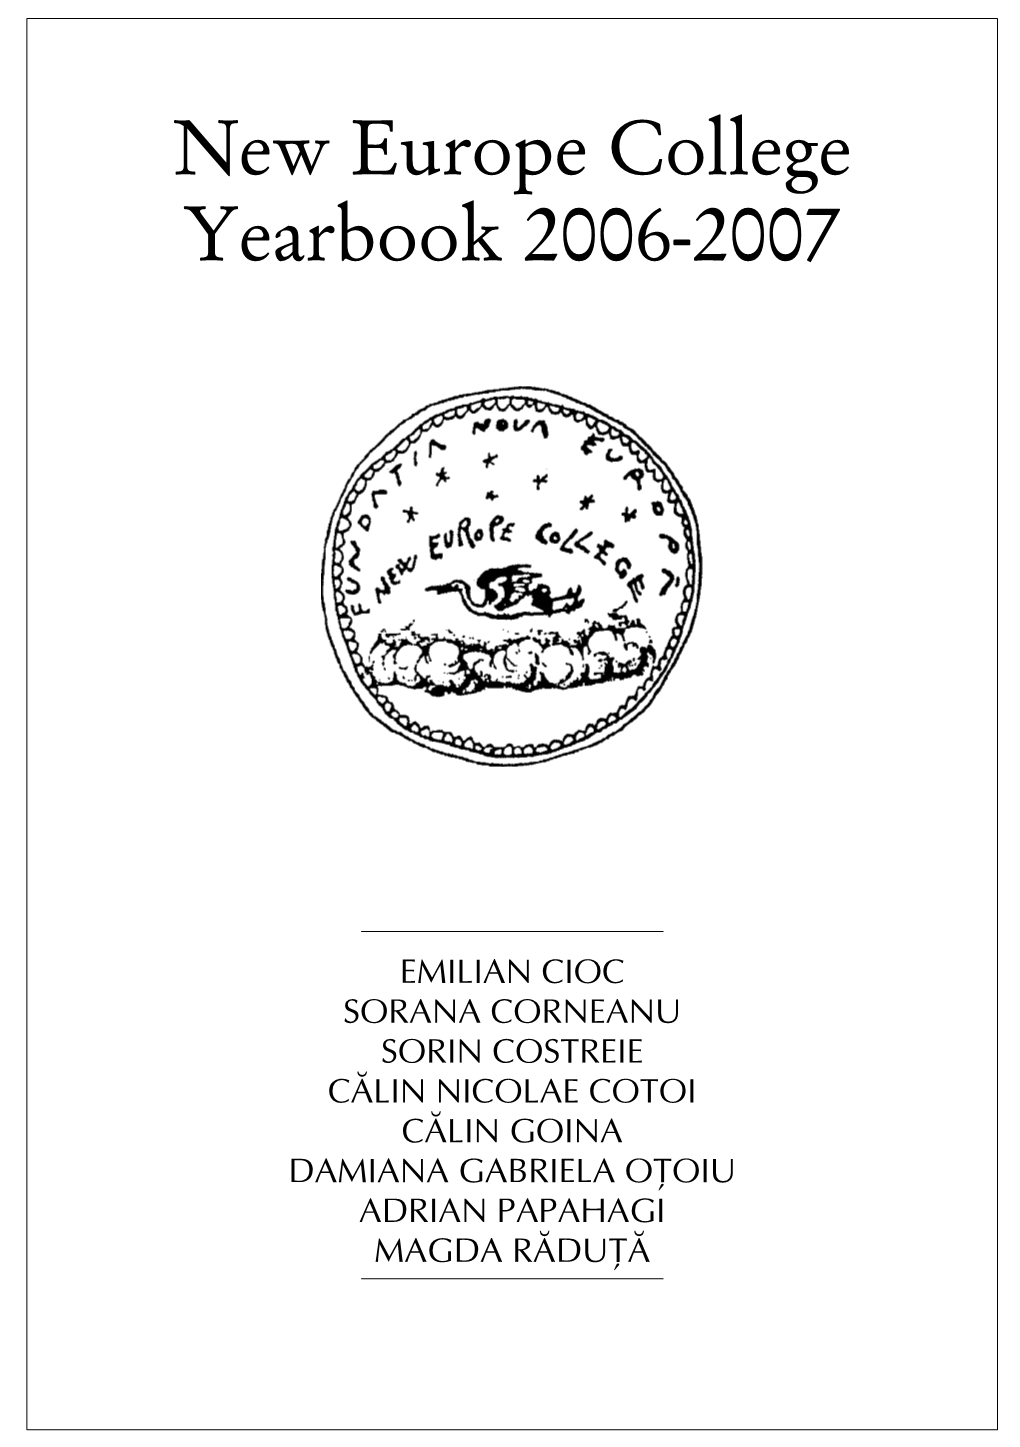 New Europe College Yearbook 2006-2007